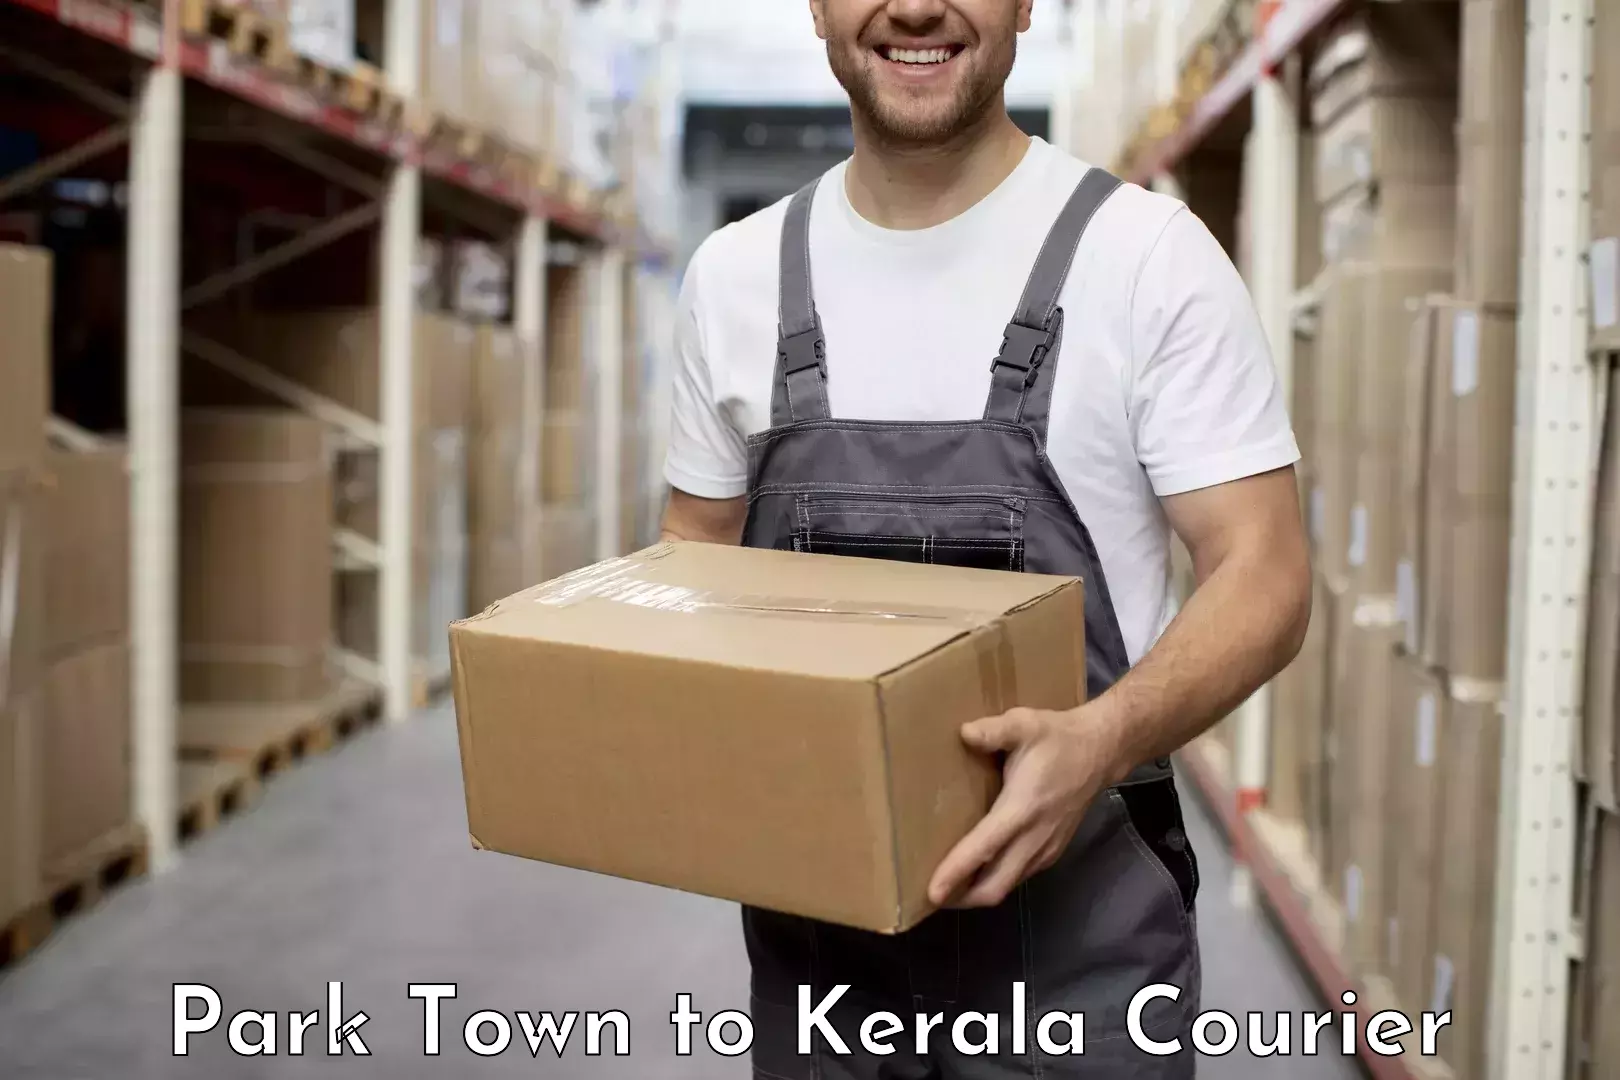 Delivery service partnership in Park Town to Kochi